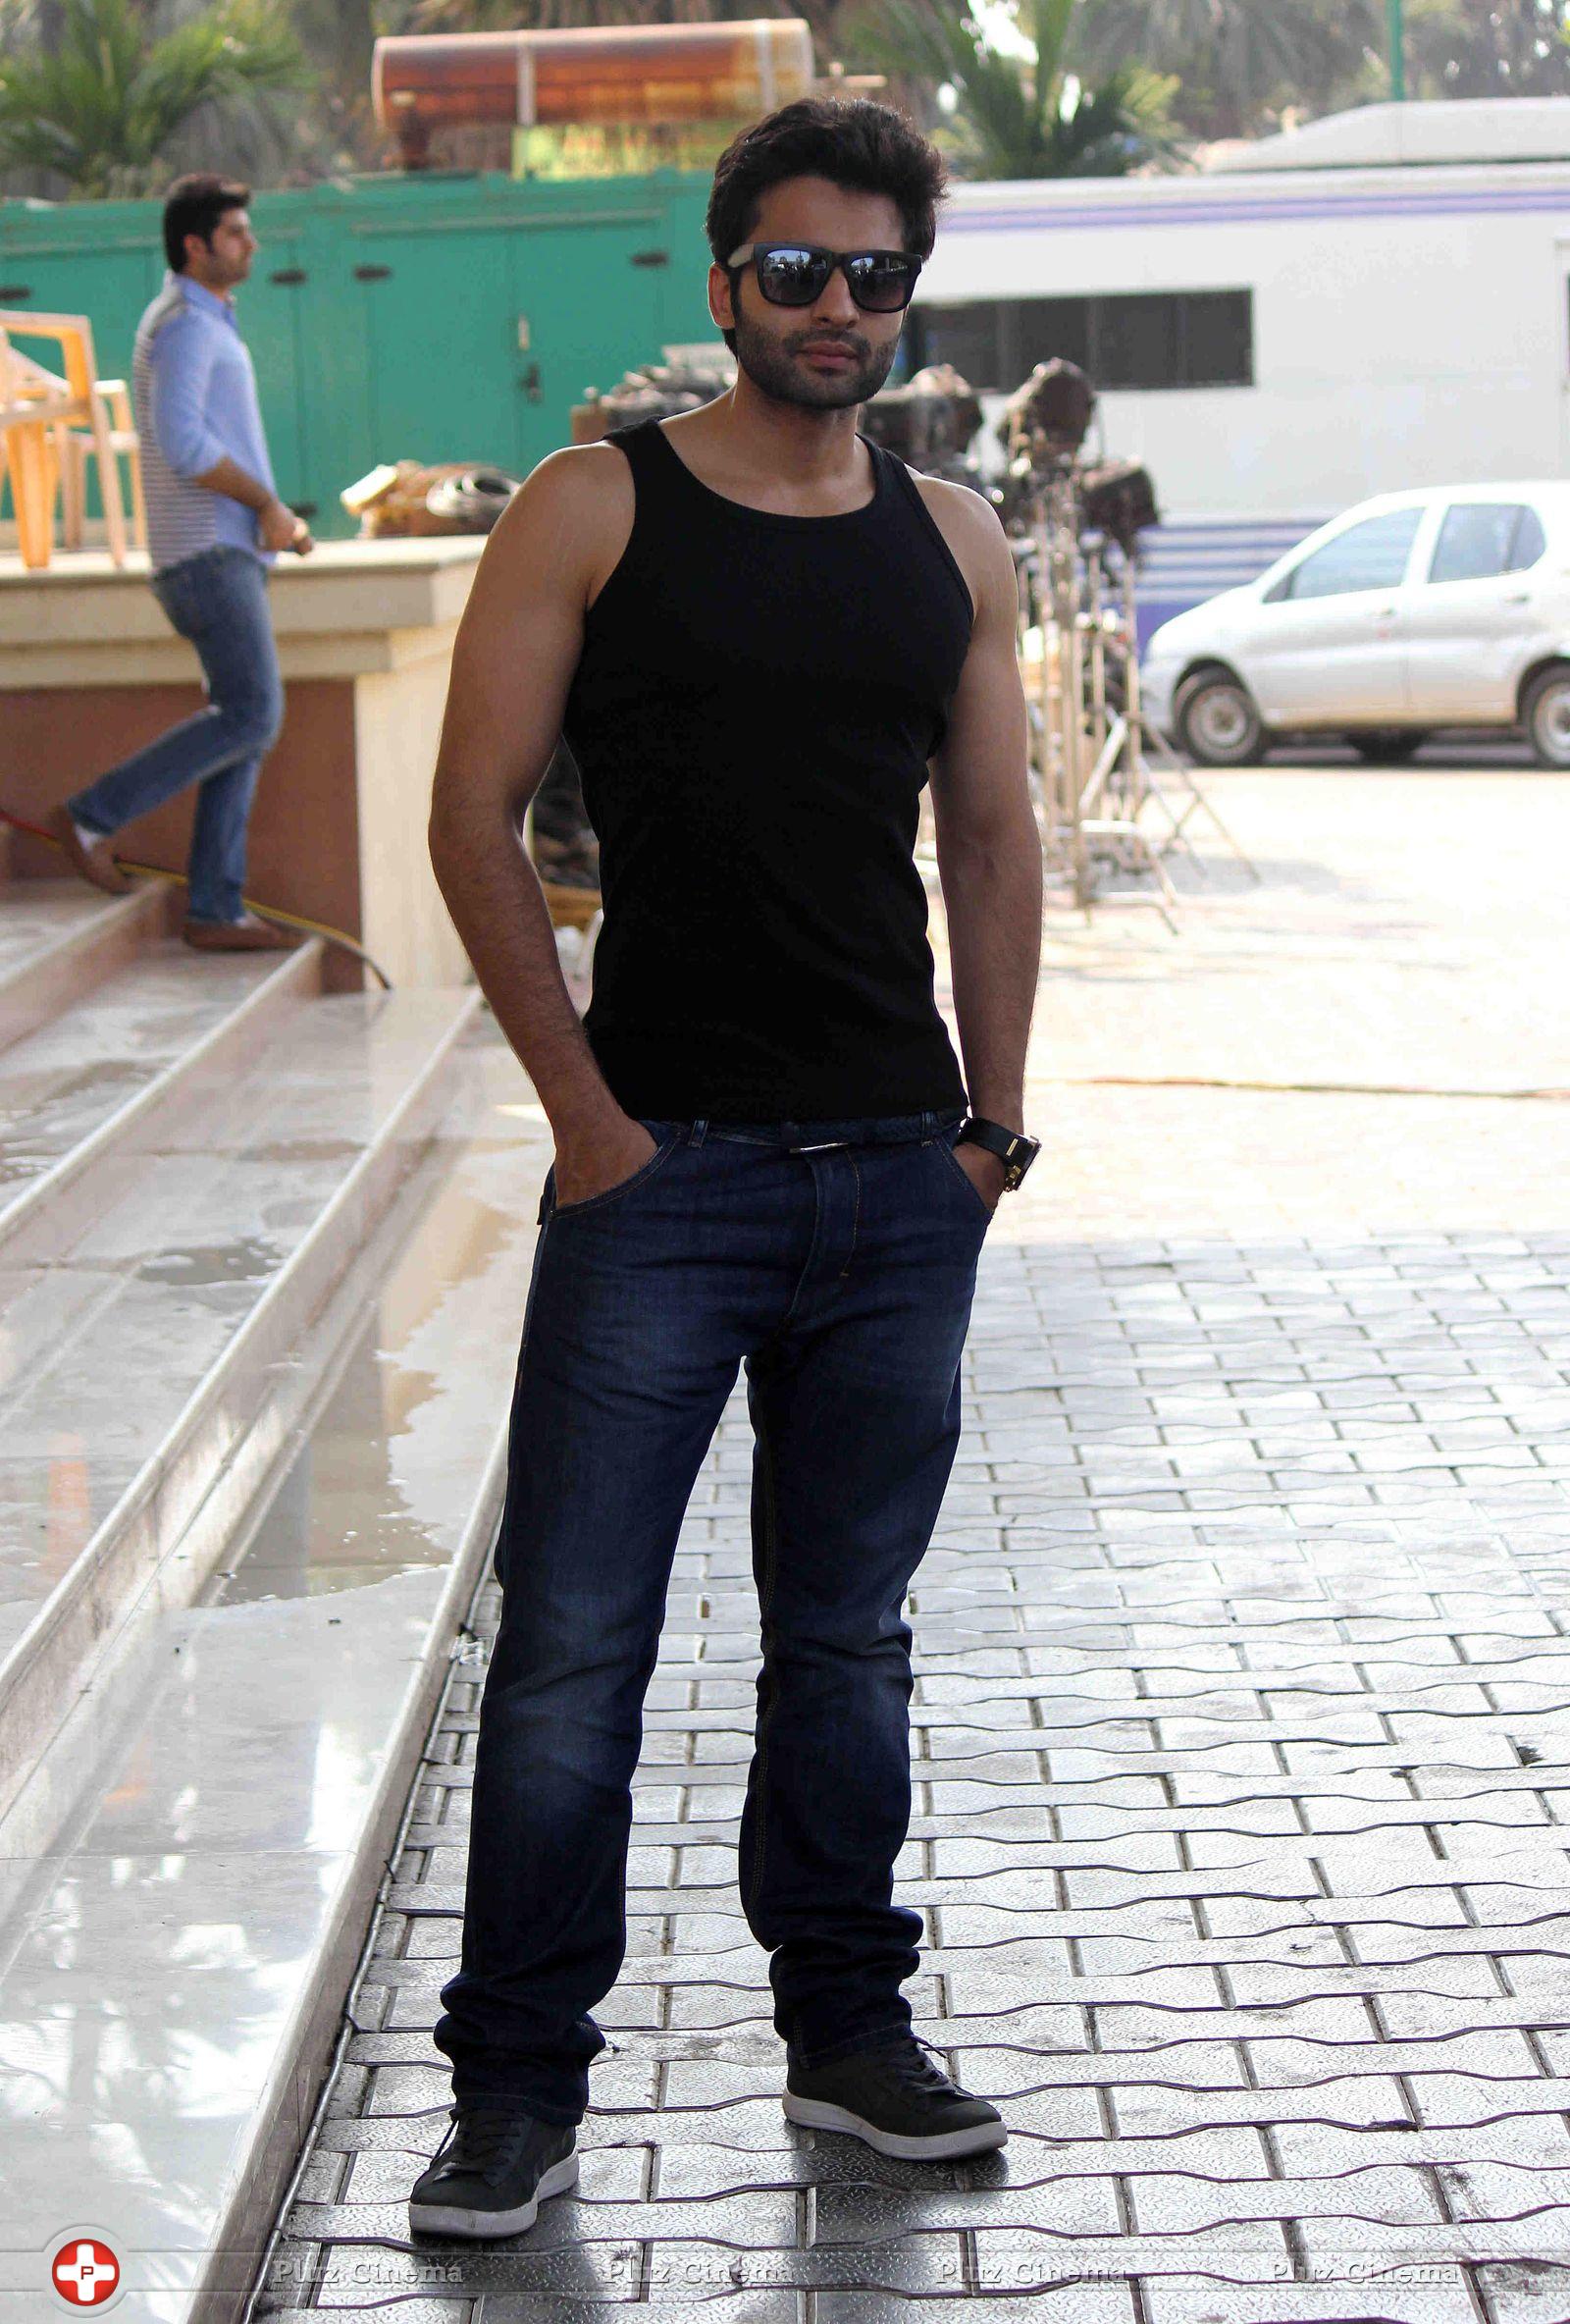 Jackky Bhagnani - Jackky Bhagnani promotes his film Youngistaan on the sets of Boogie Woogie Photos | Picture 733327